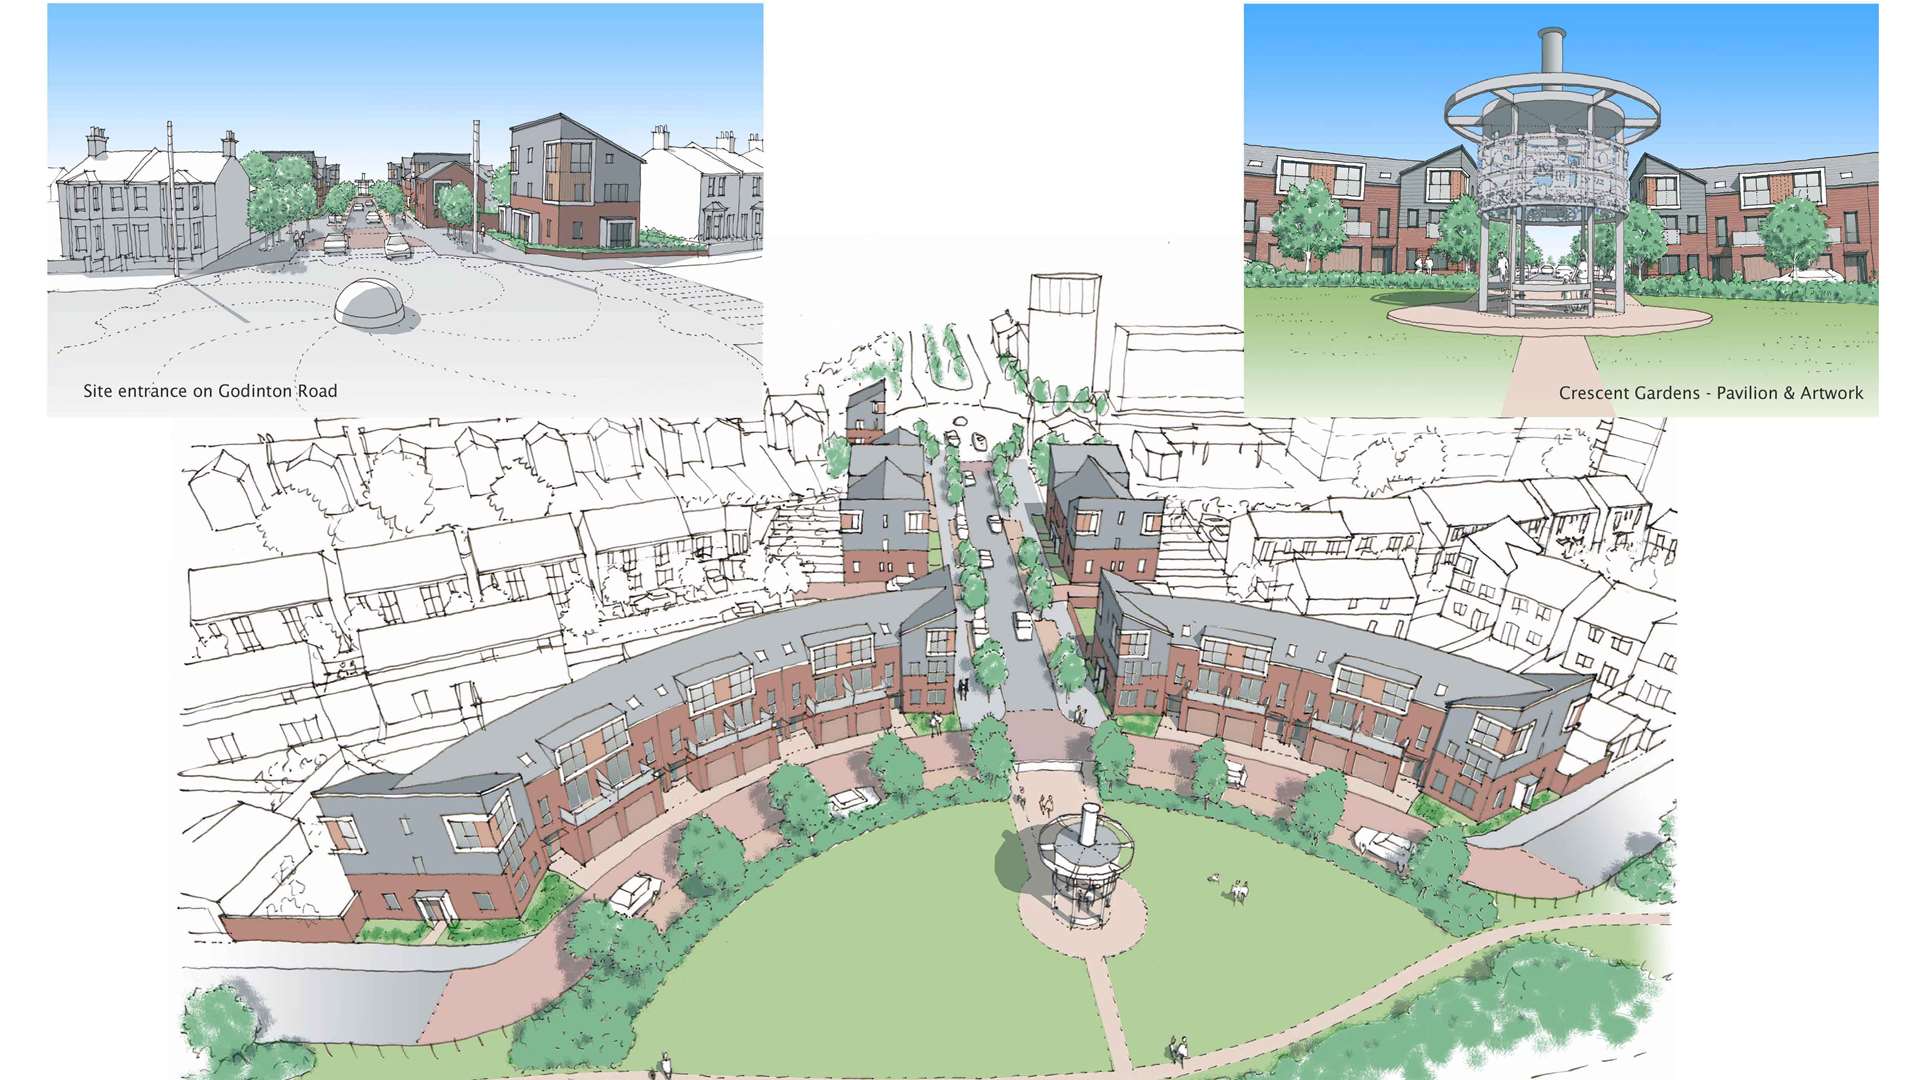 Artist impressions show what the new housing development could look like